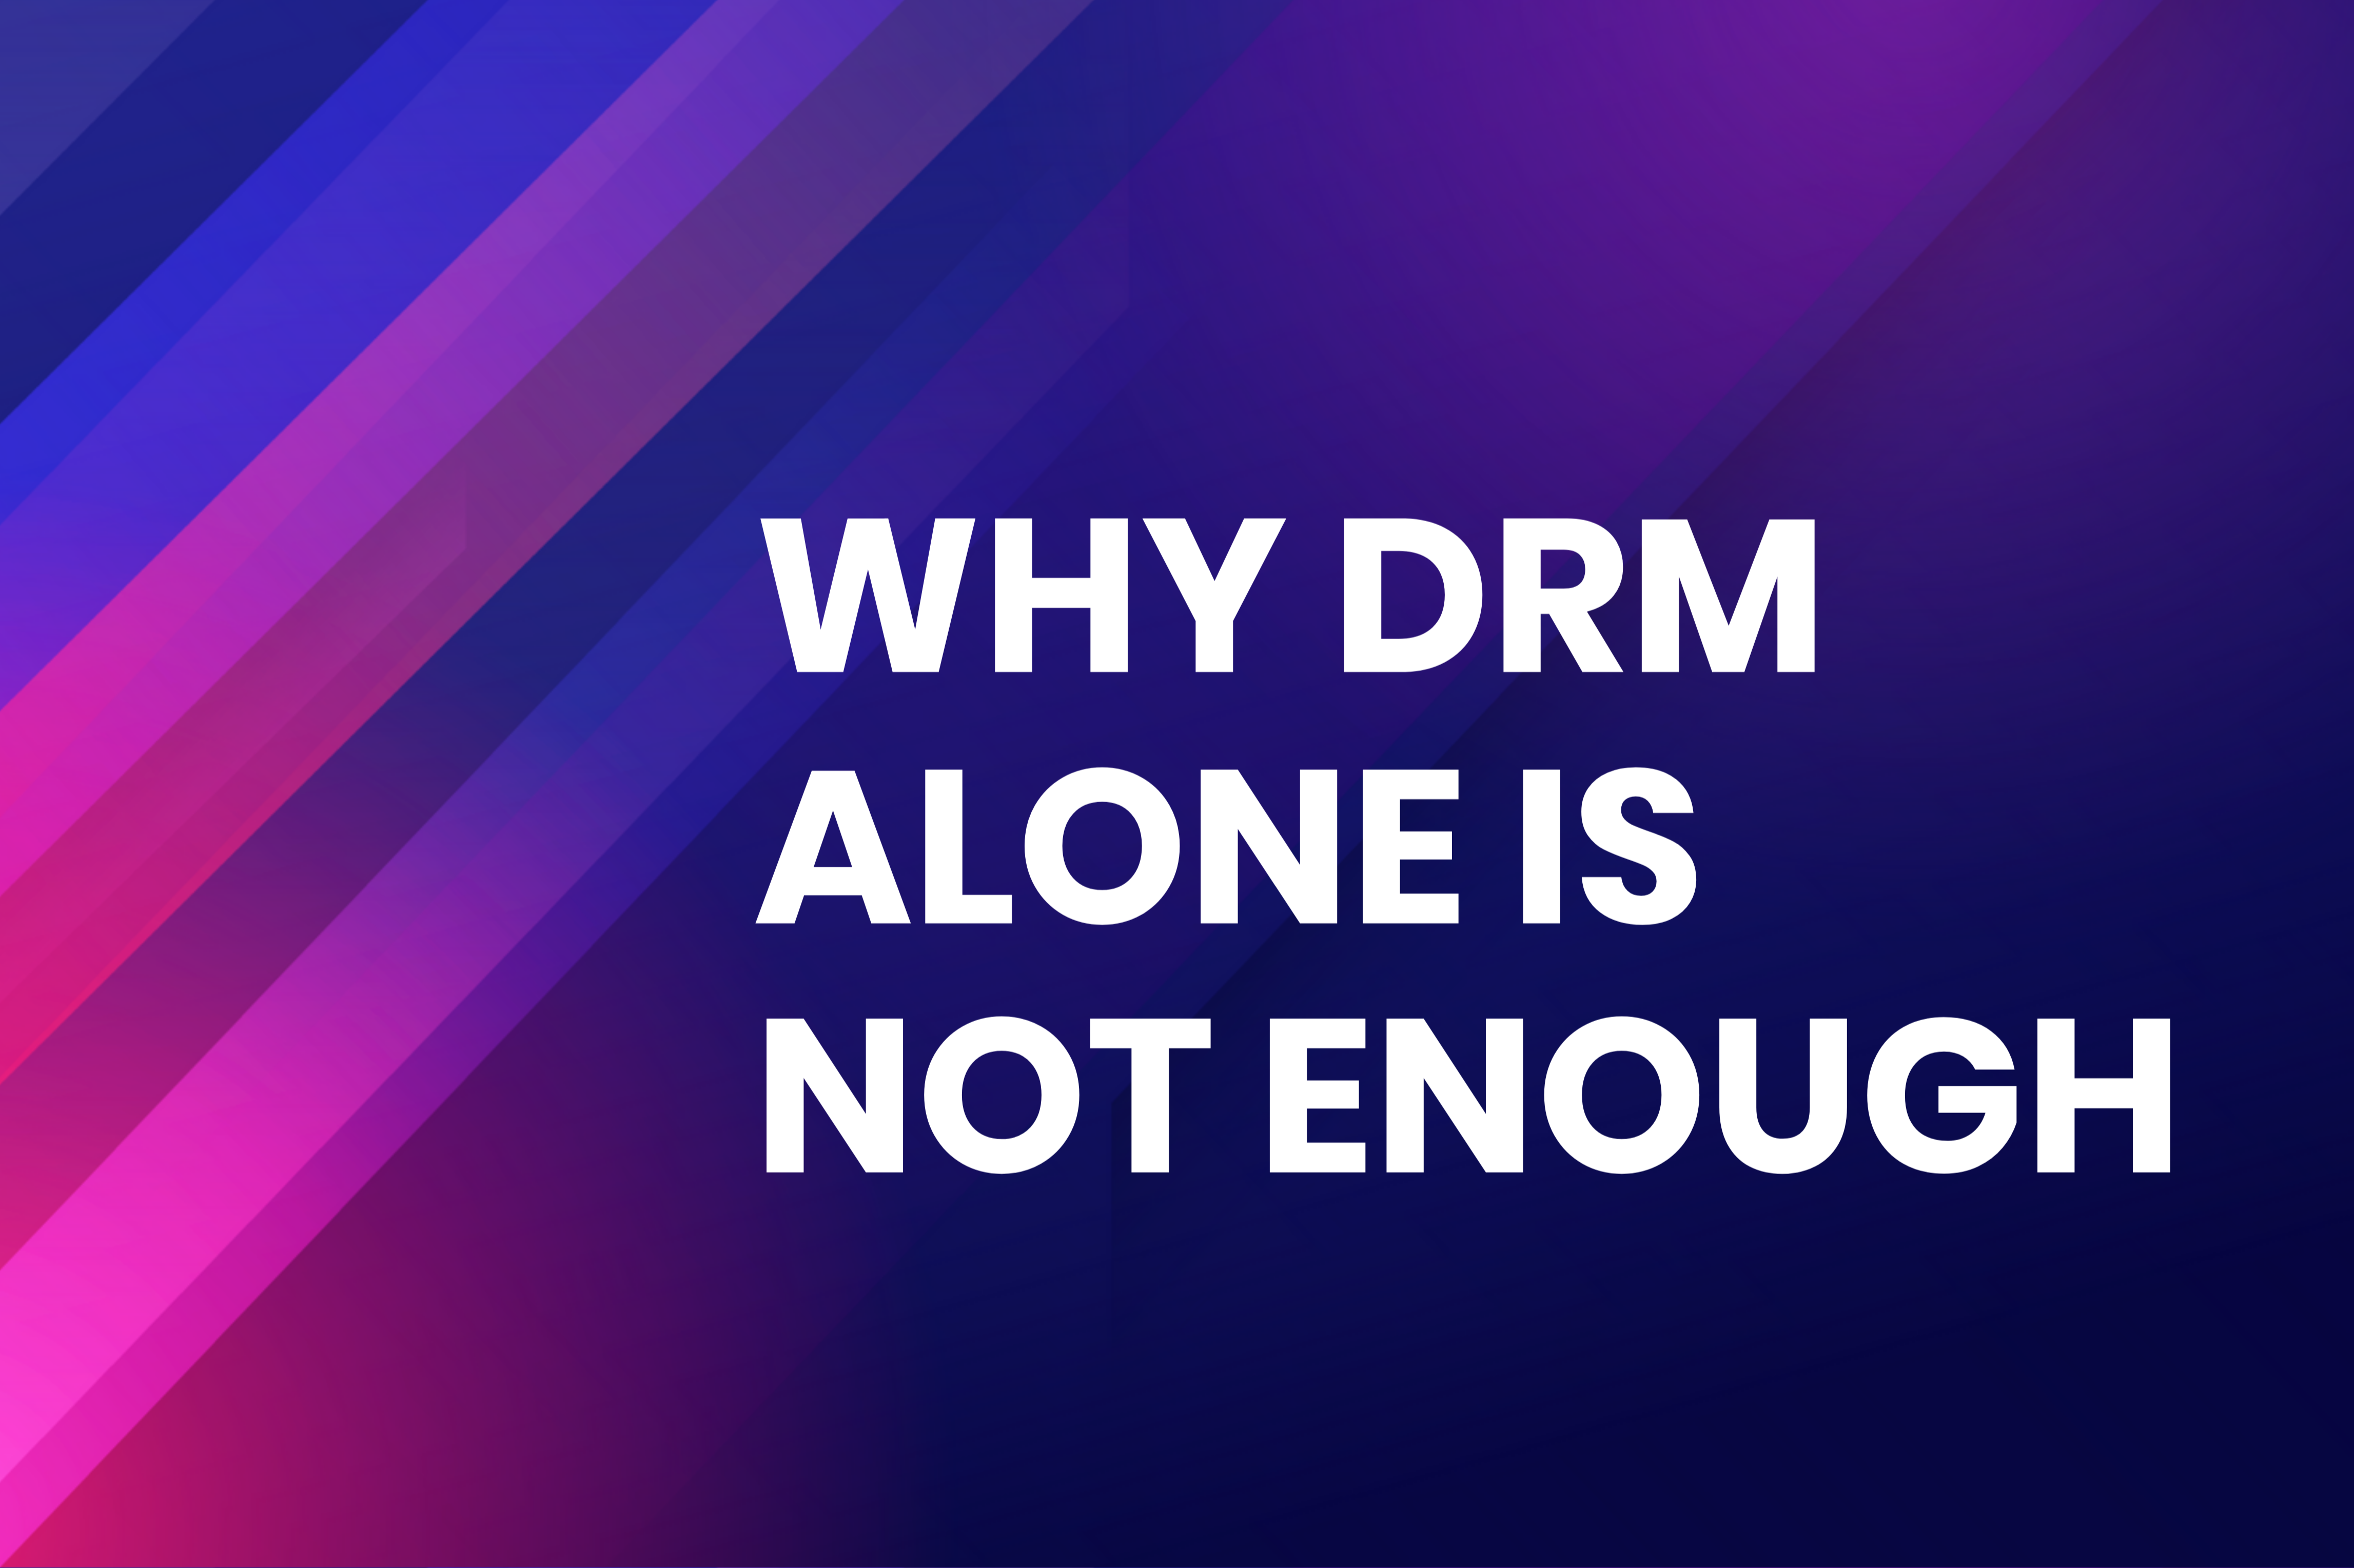 Why DRM alone is not enough